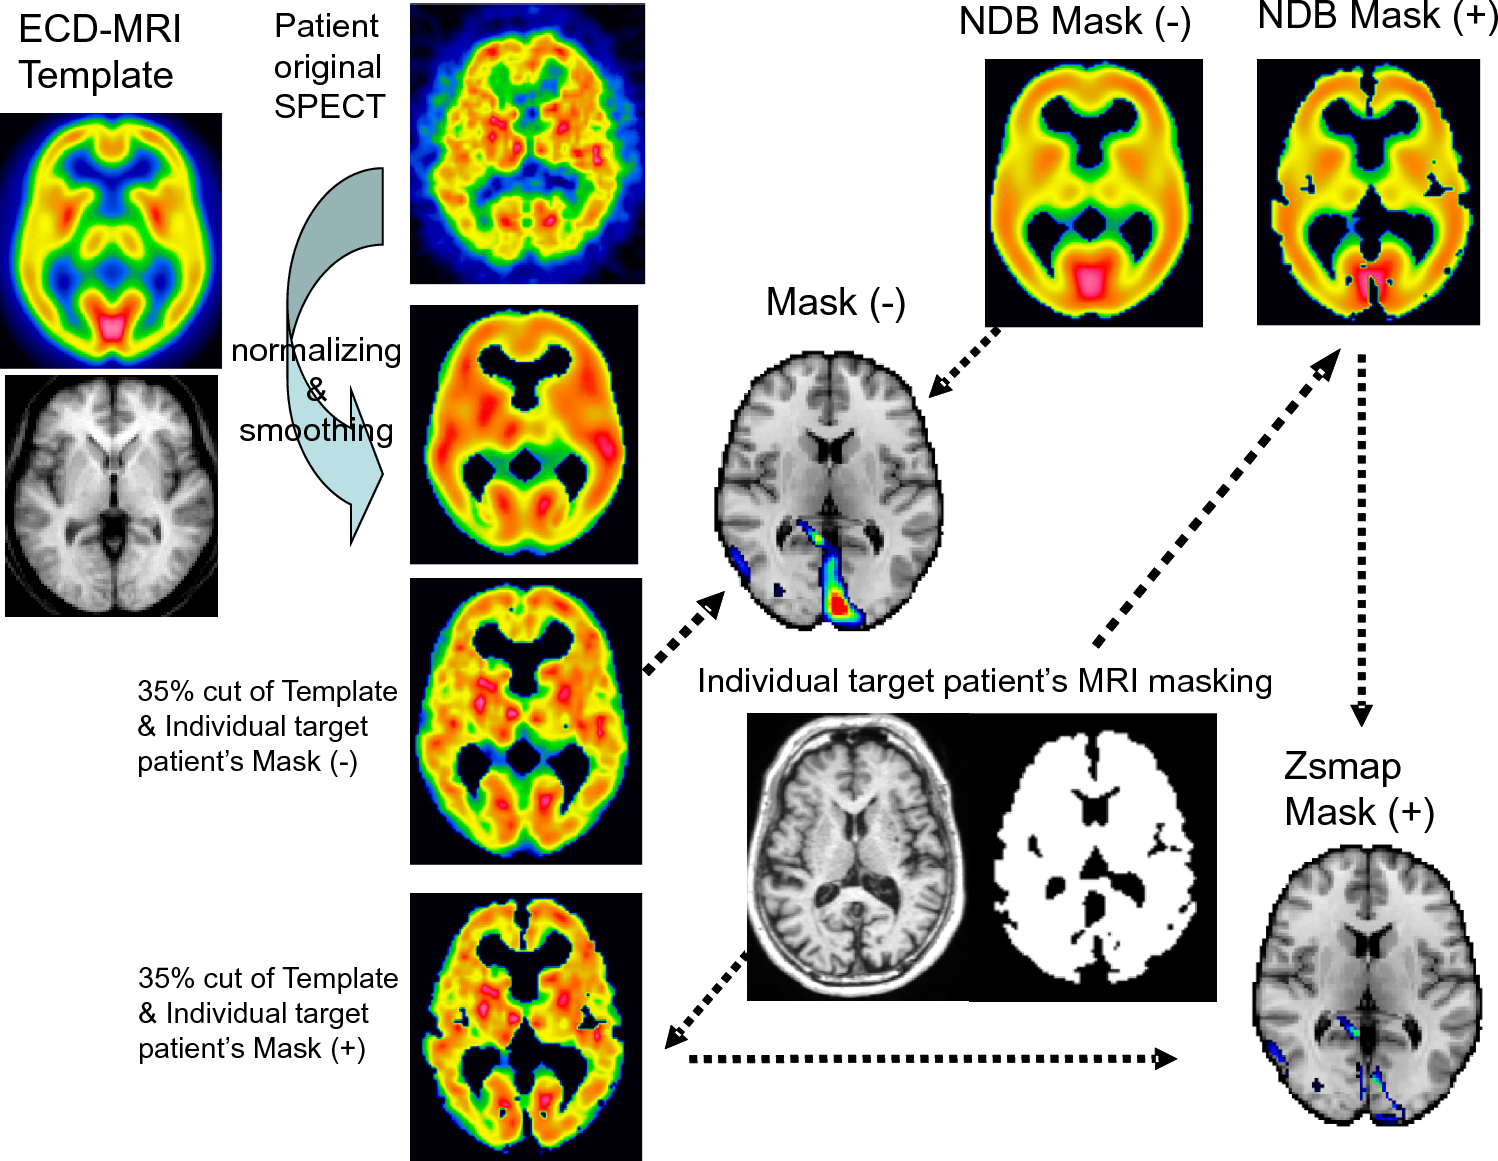 Diagnostic approach with Z-score mapping to reduce artifacts caused by cerebral atrophy in regional CBF assessment of mild cognitive impairment (MCI) and Alzheimer's disease by [99mTc]-ECD and SPECT